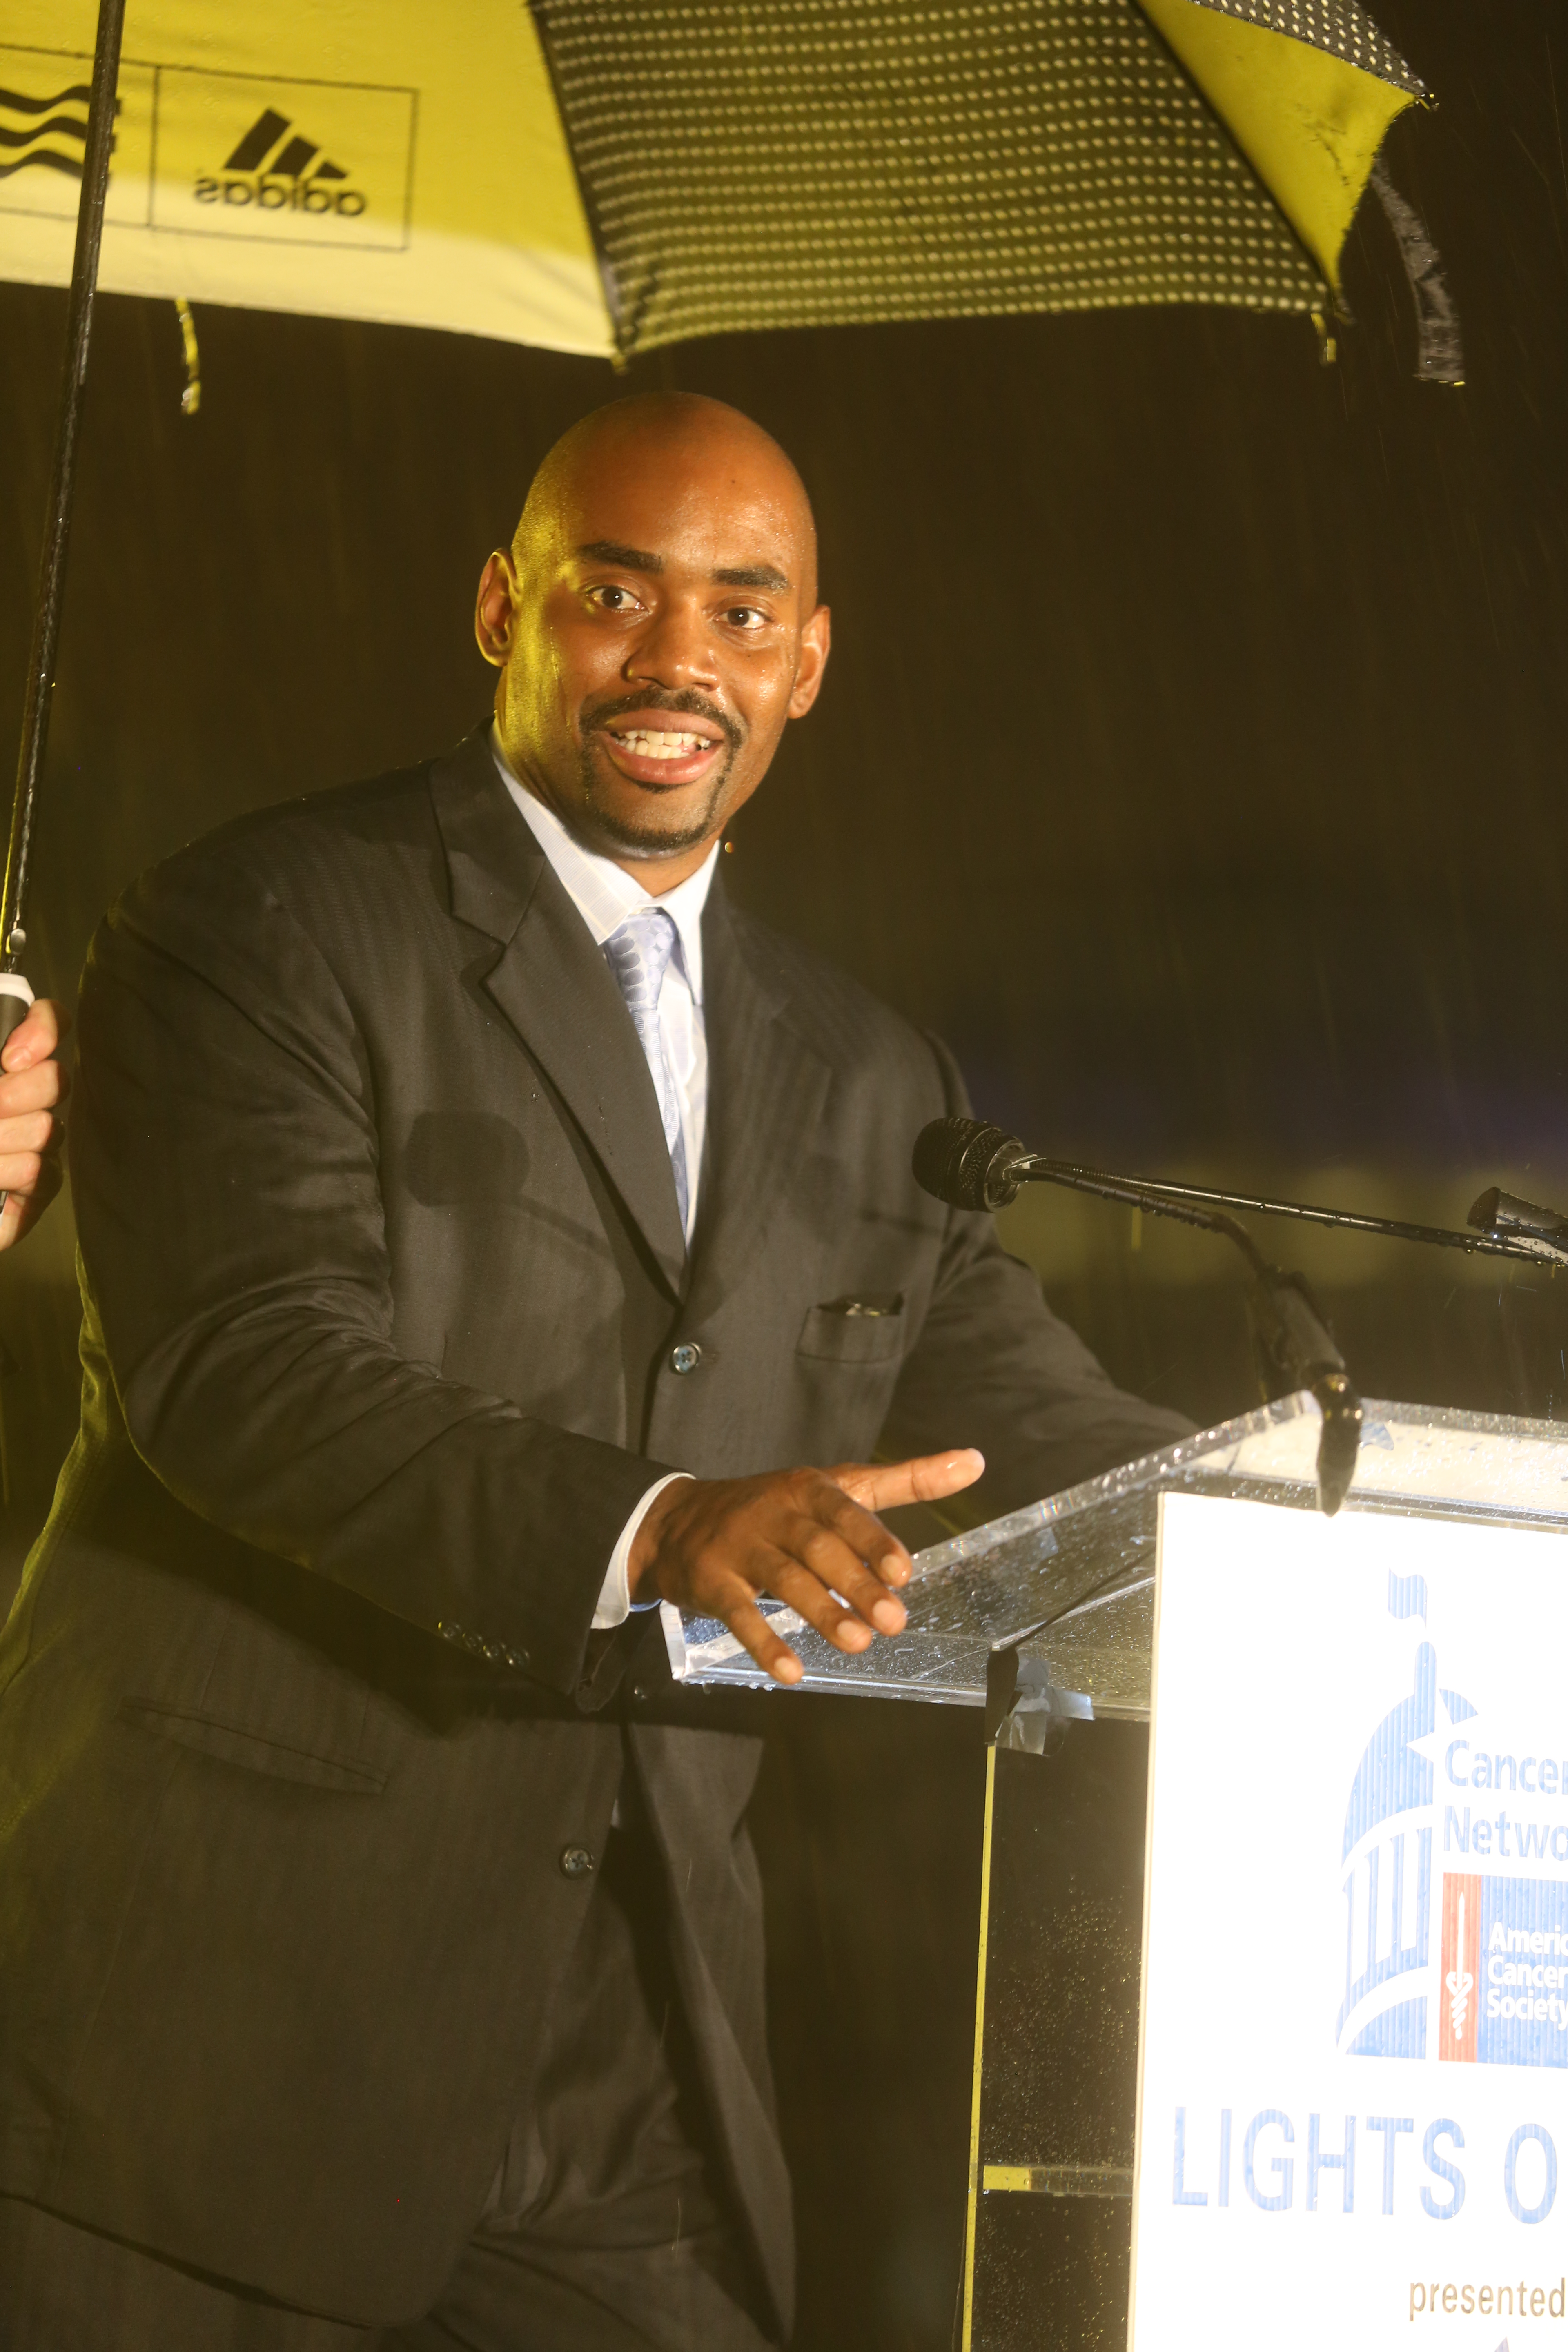 Former NFL Player Chris Draft Joined Hundreds of Cancer Advocates in Solemn Ceremony on National Mall